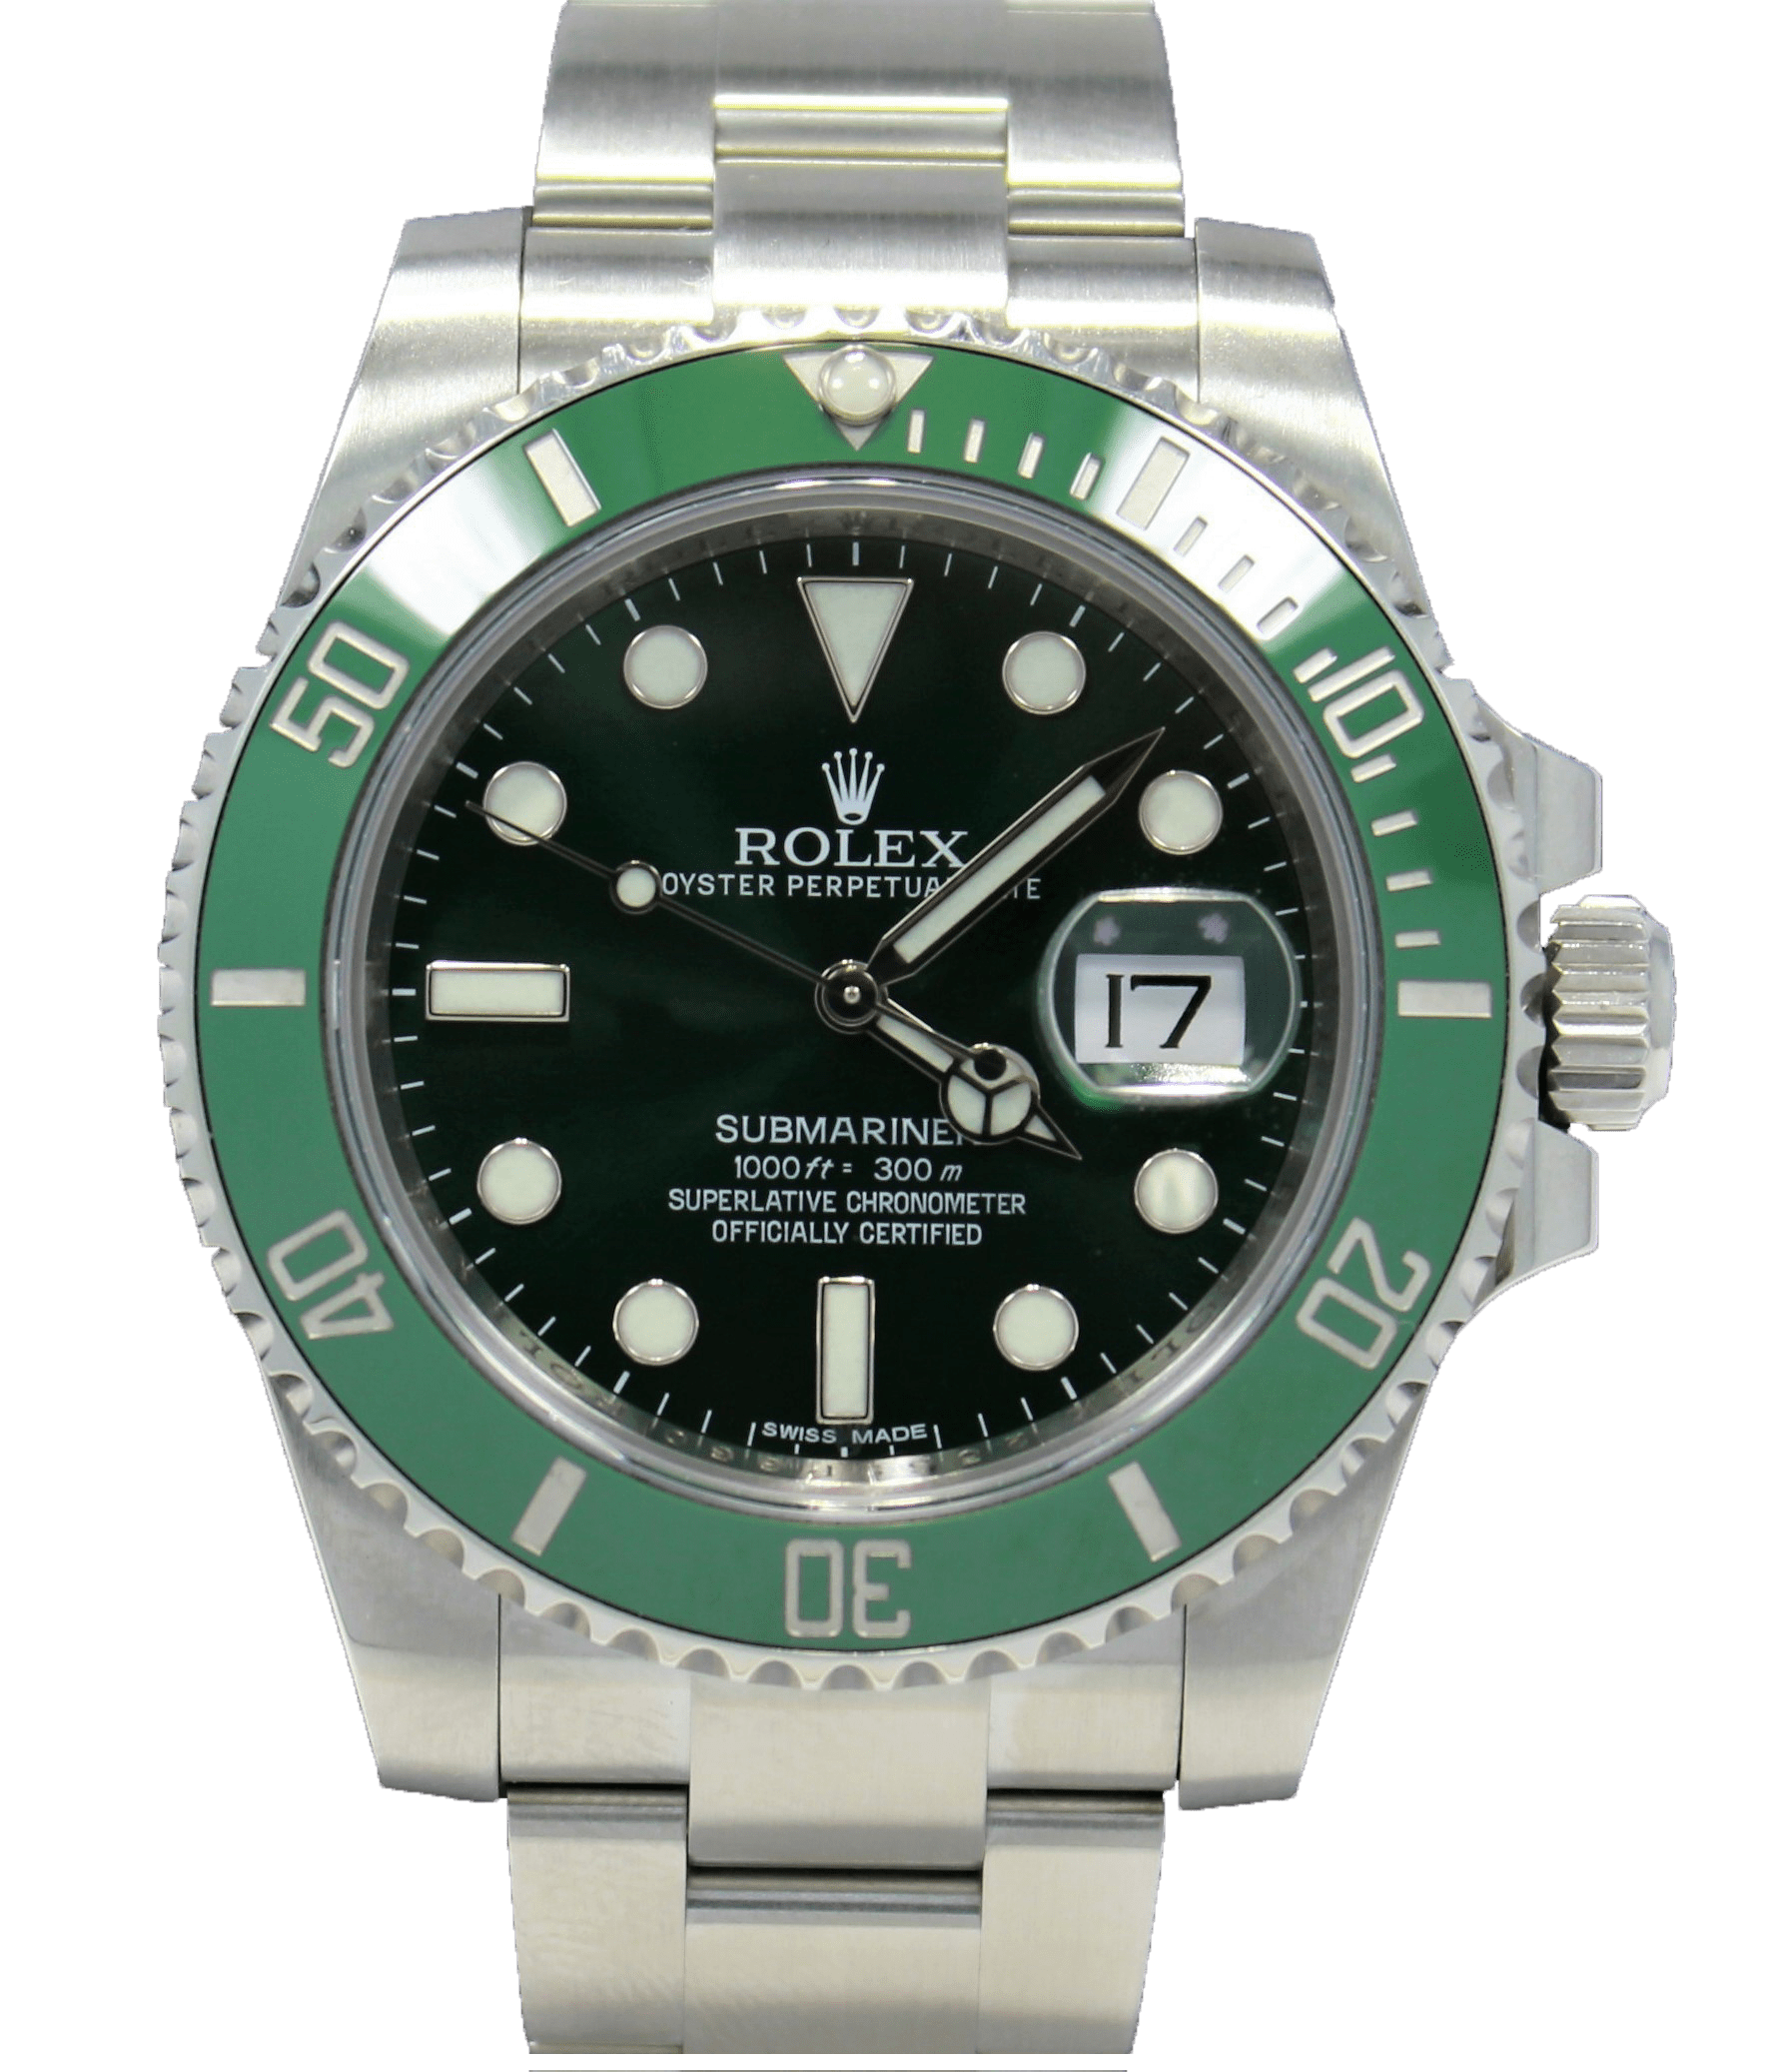 Rolex Submariner Hulk 116610LV Mint Condition for $26,975 for